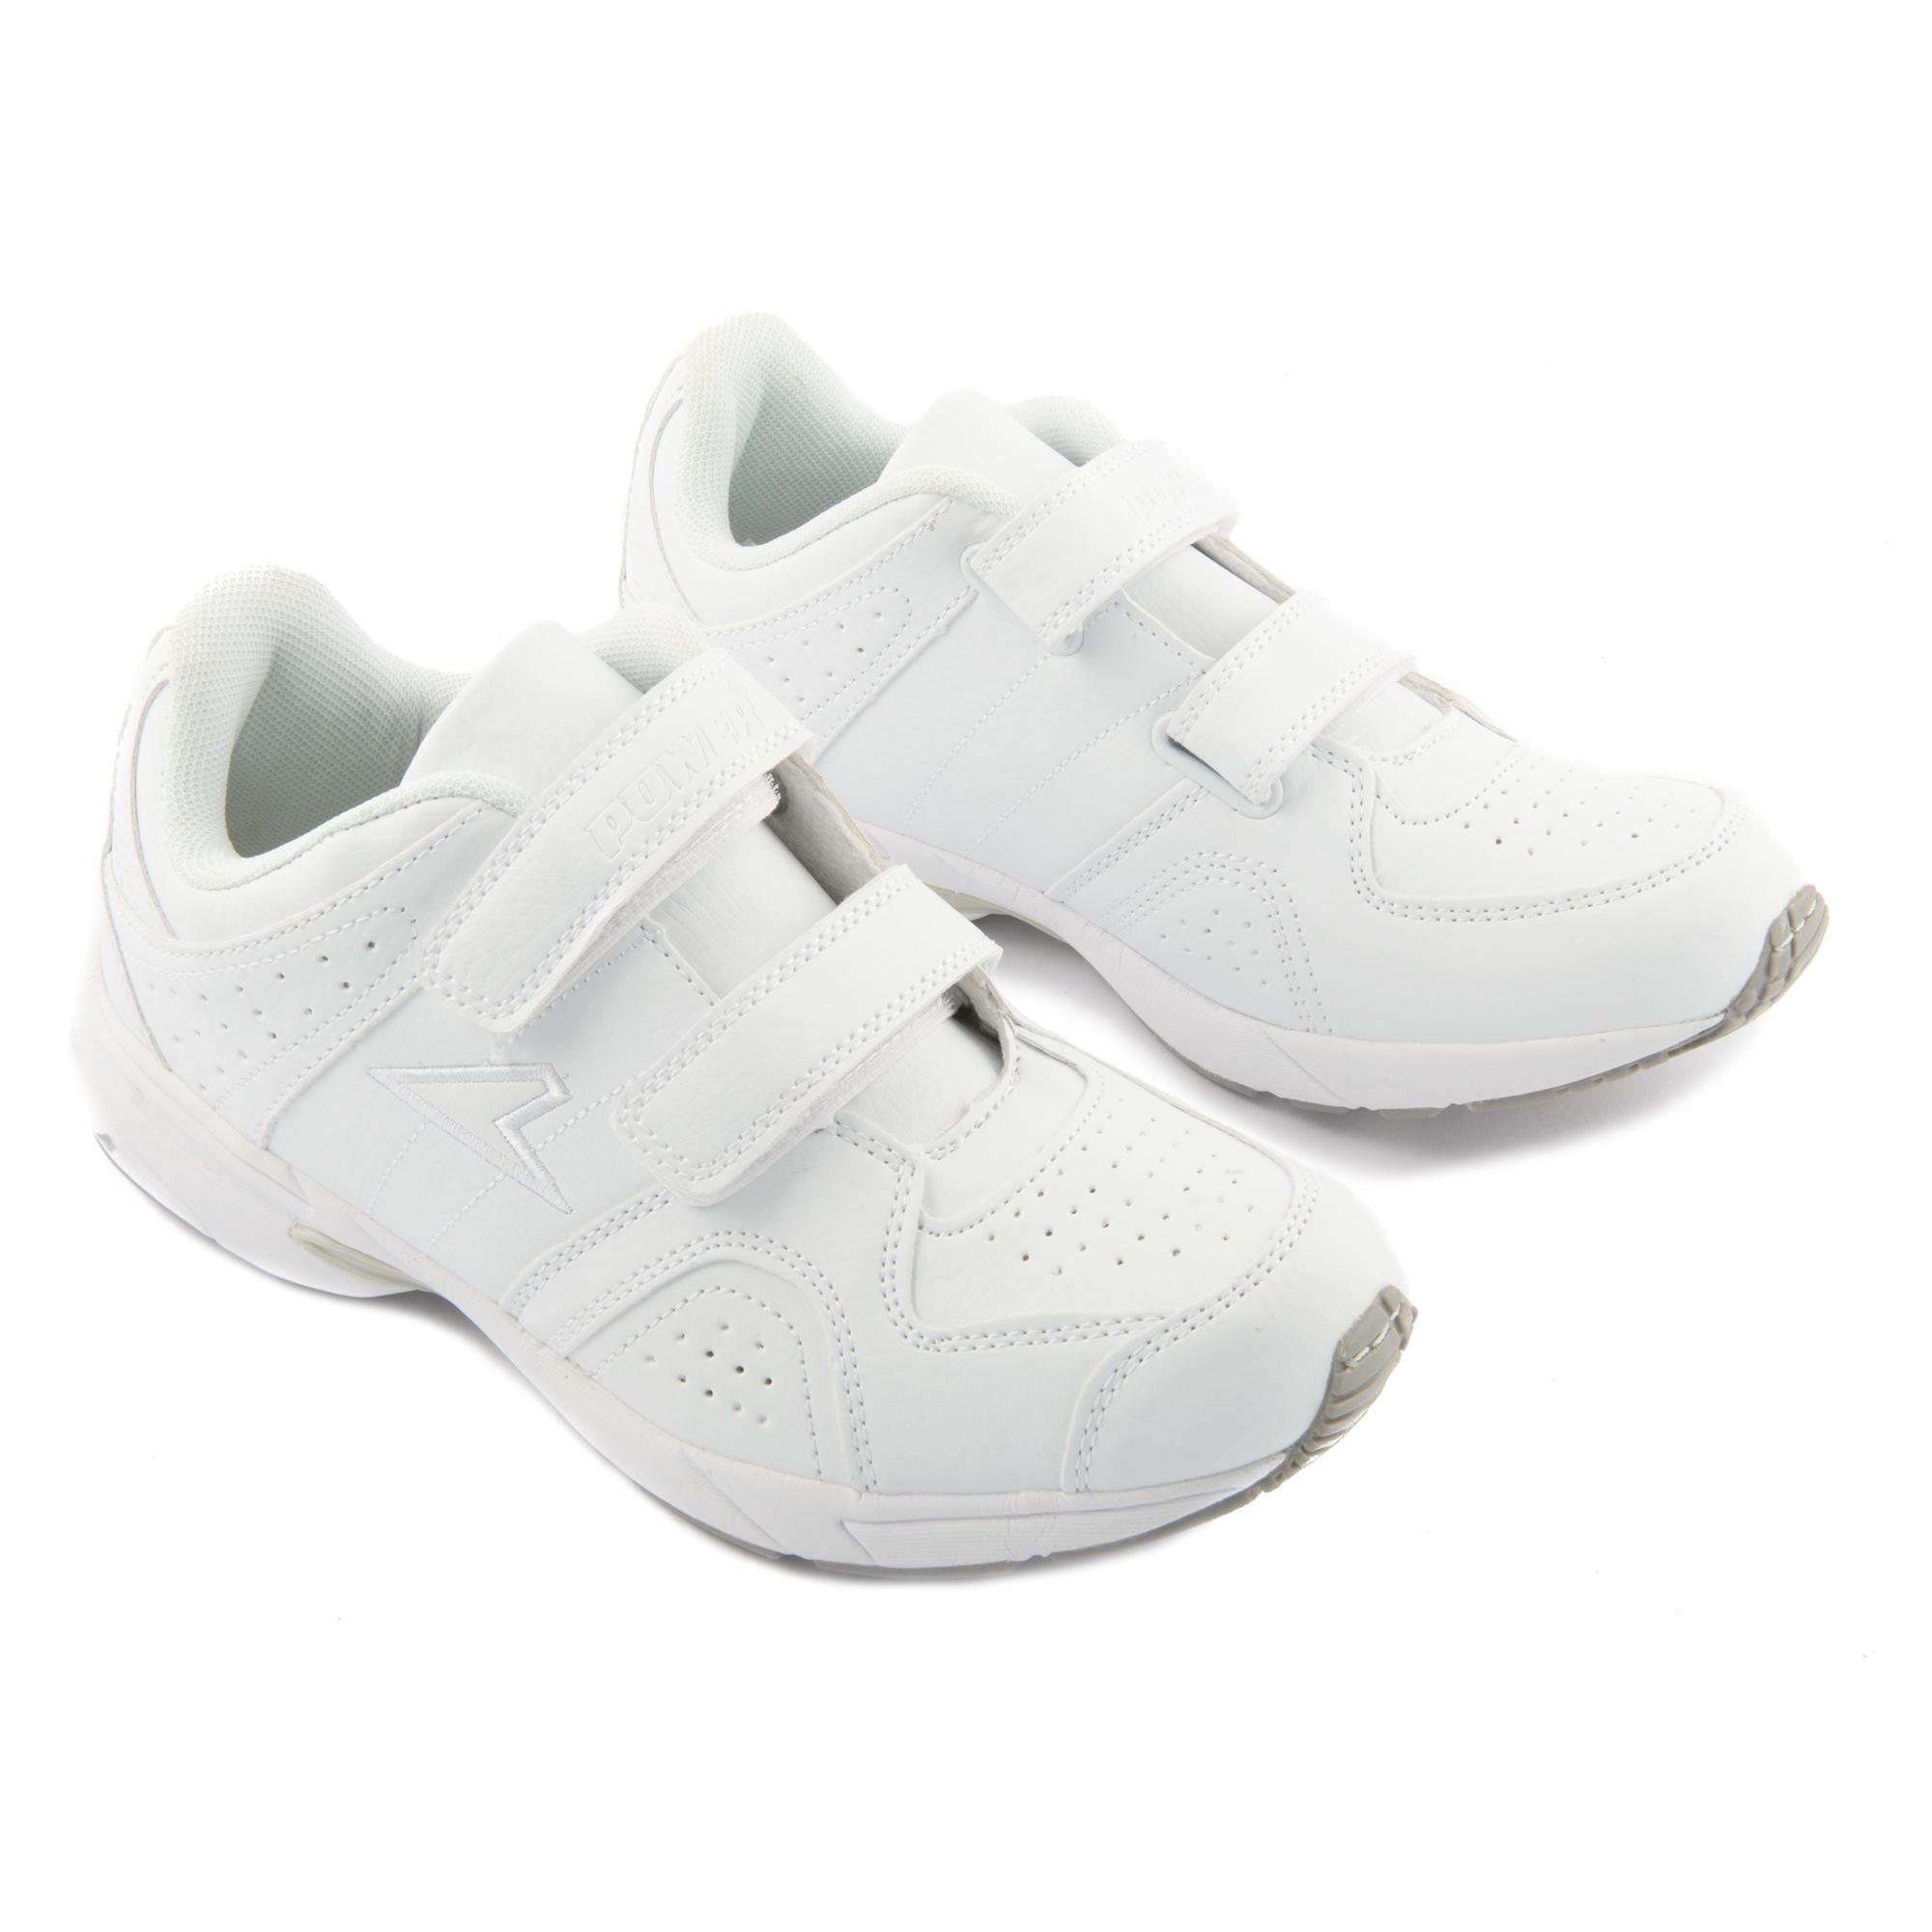 power school shoes white